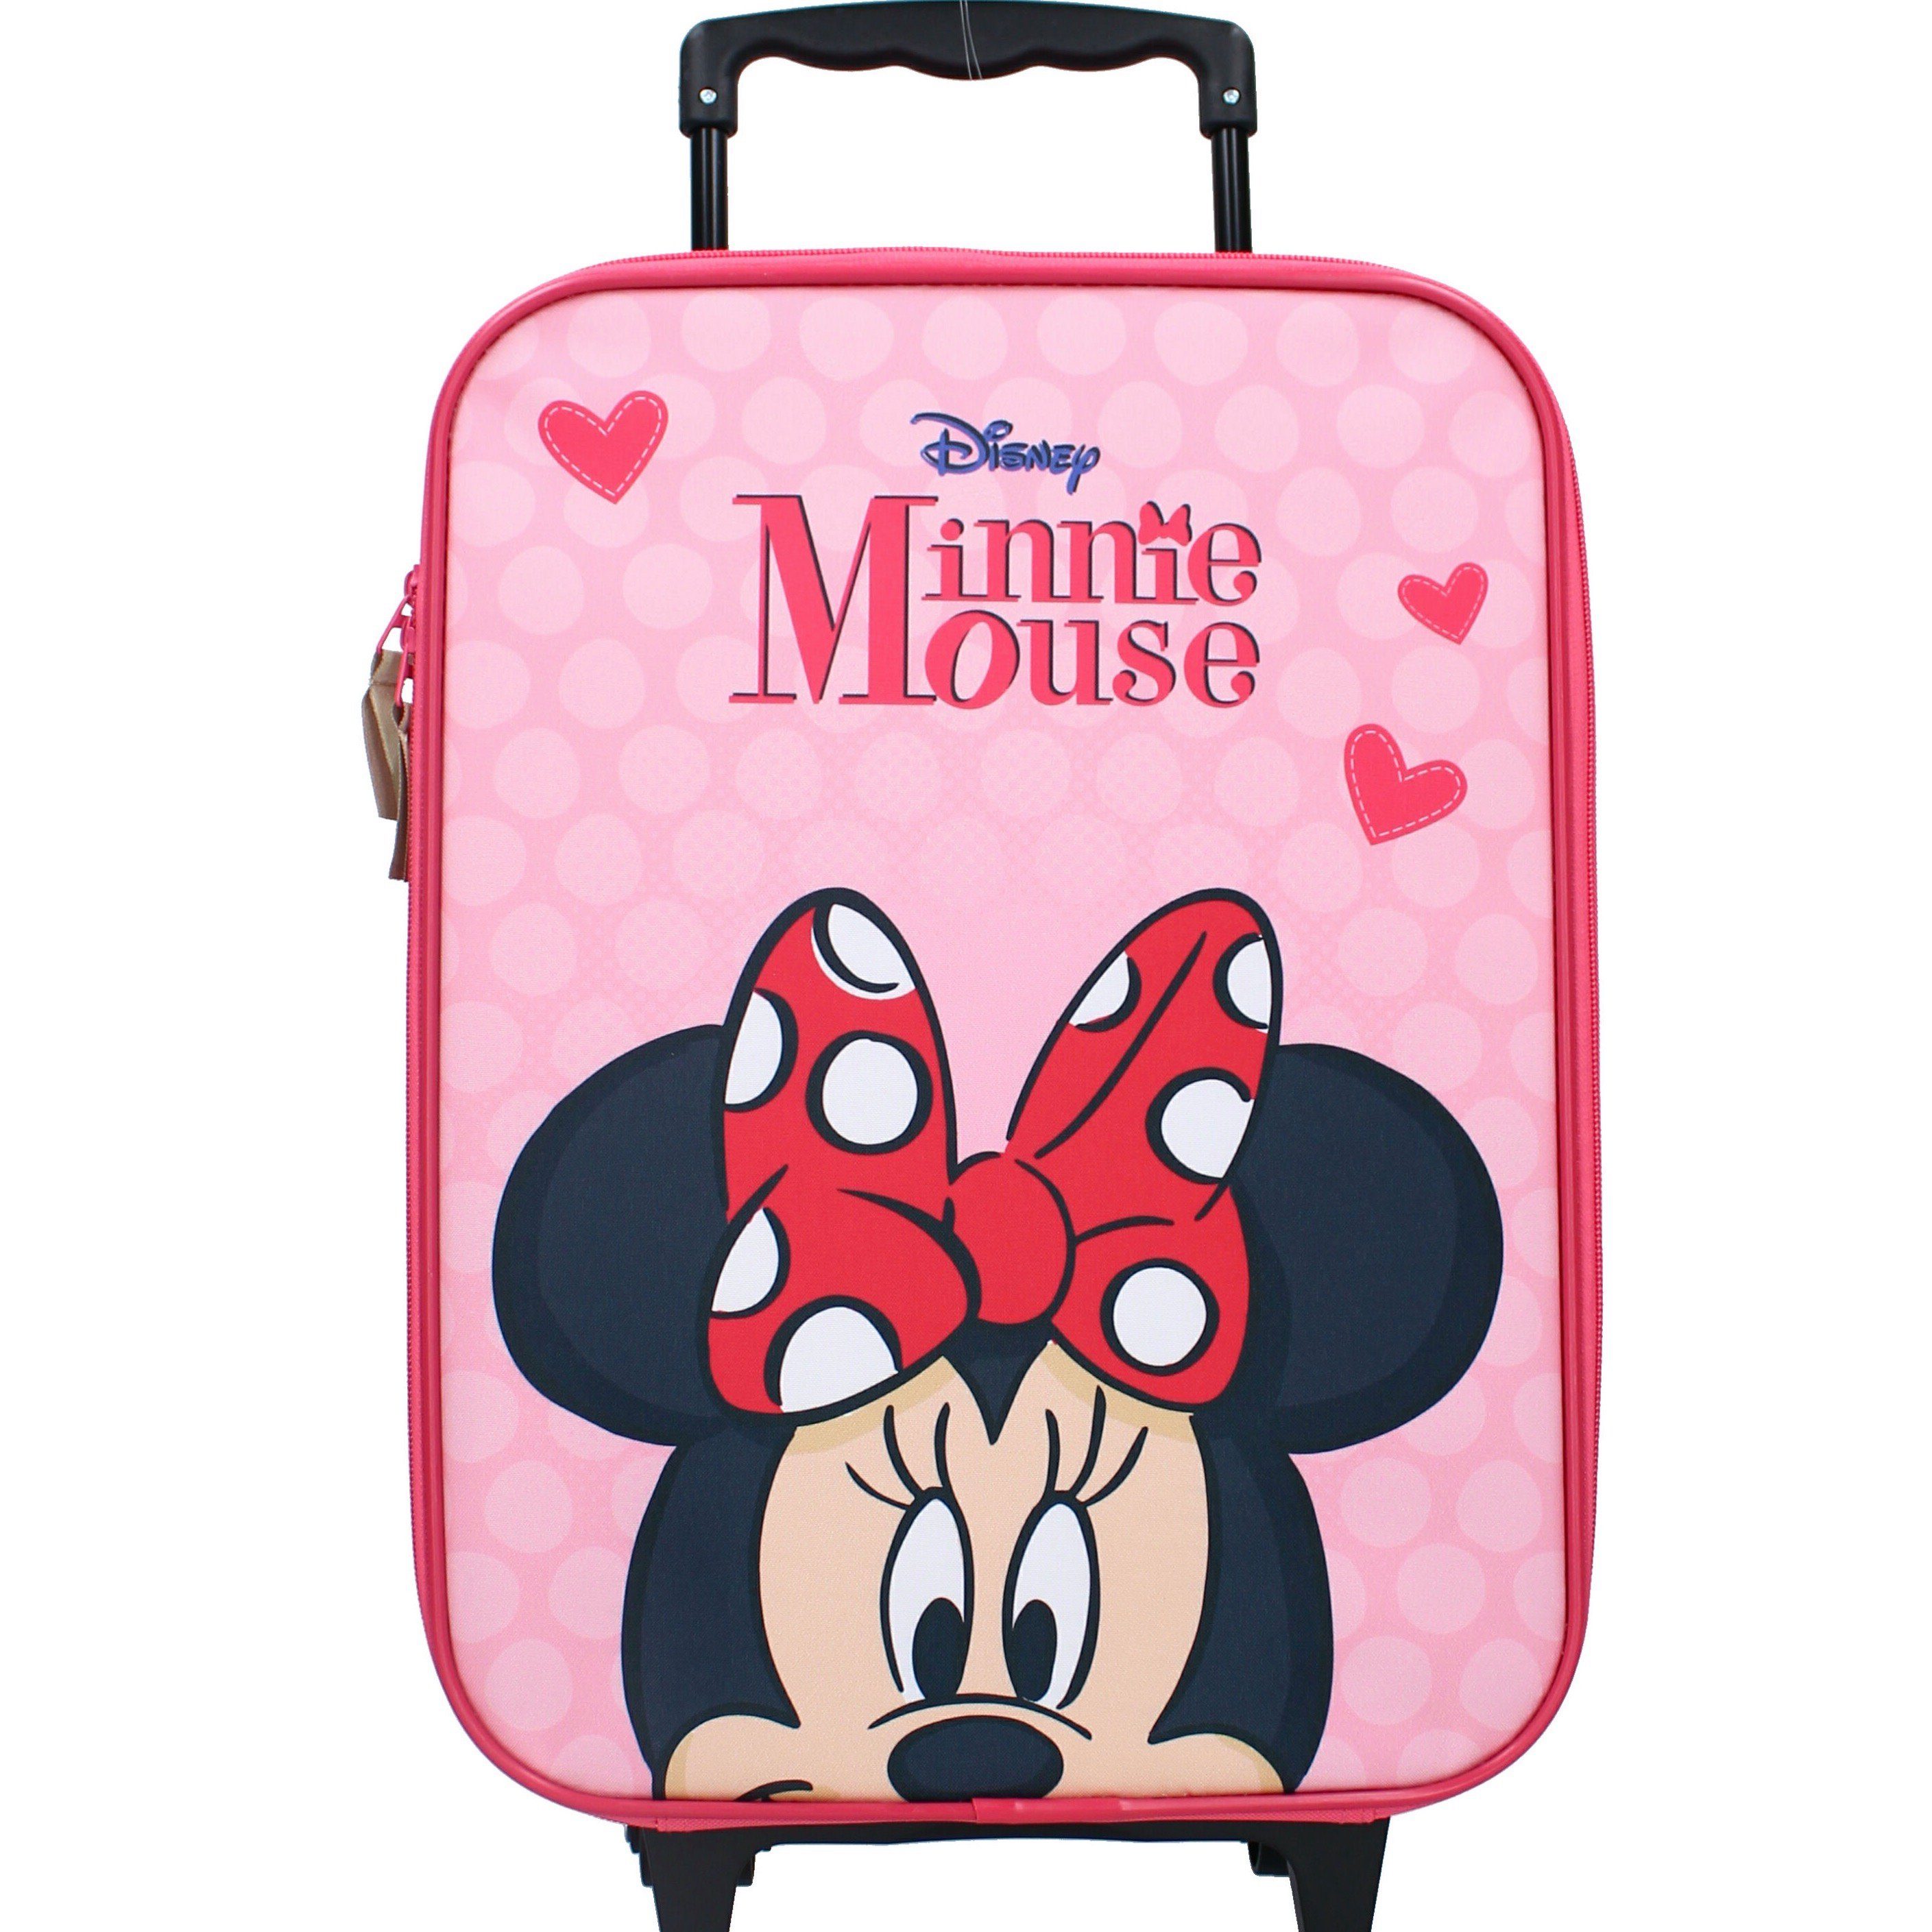 Disney Pink, Trolley 2 Minnie Trolley Maus Kinderkoffer Mouse Rollen, Kindertrolley Minni